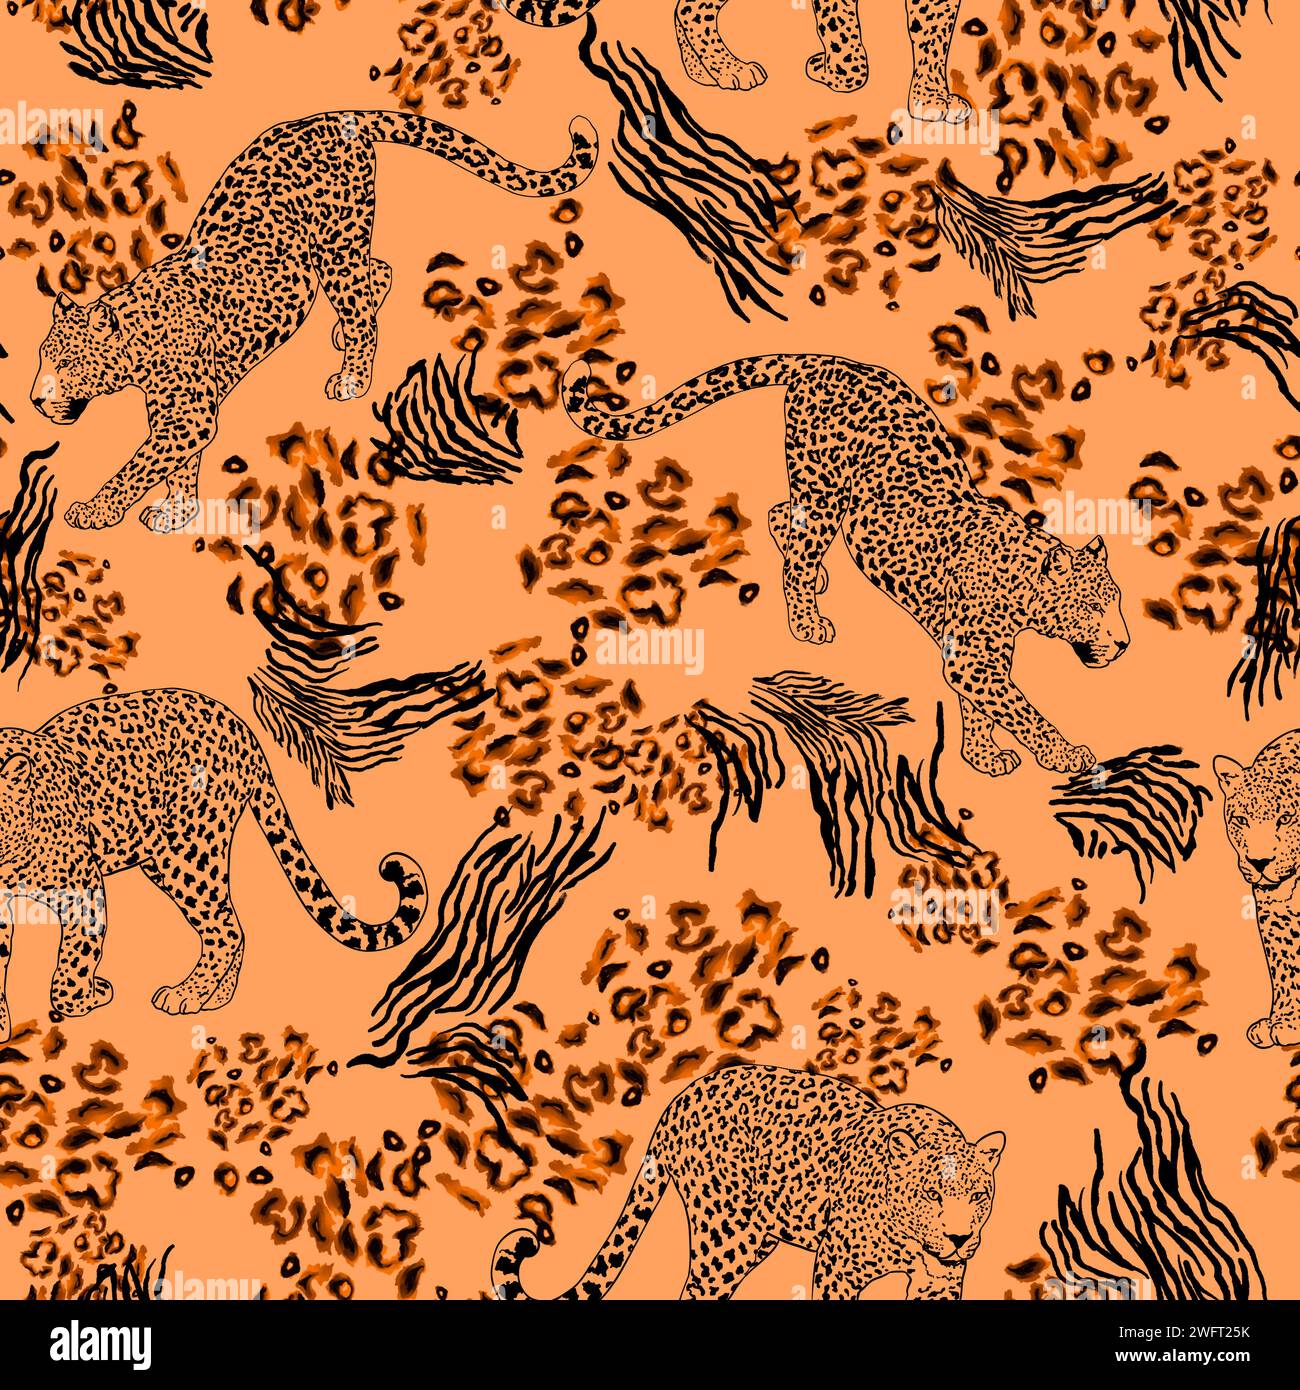 Leopard and animal skin texture seamless pattern Stock Photo